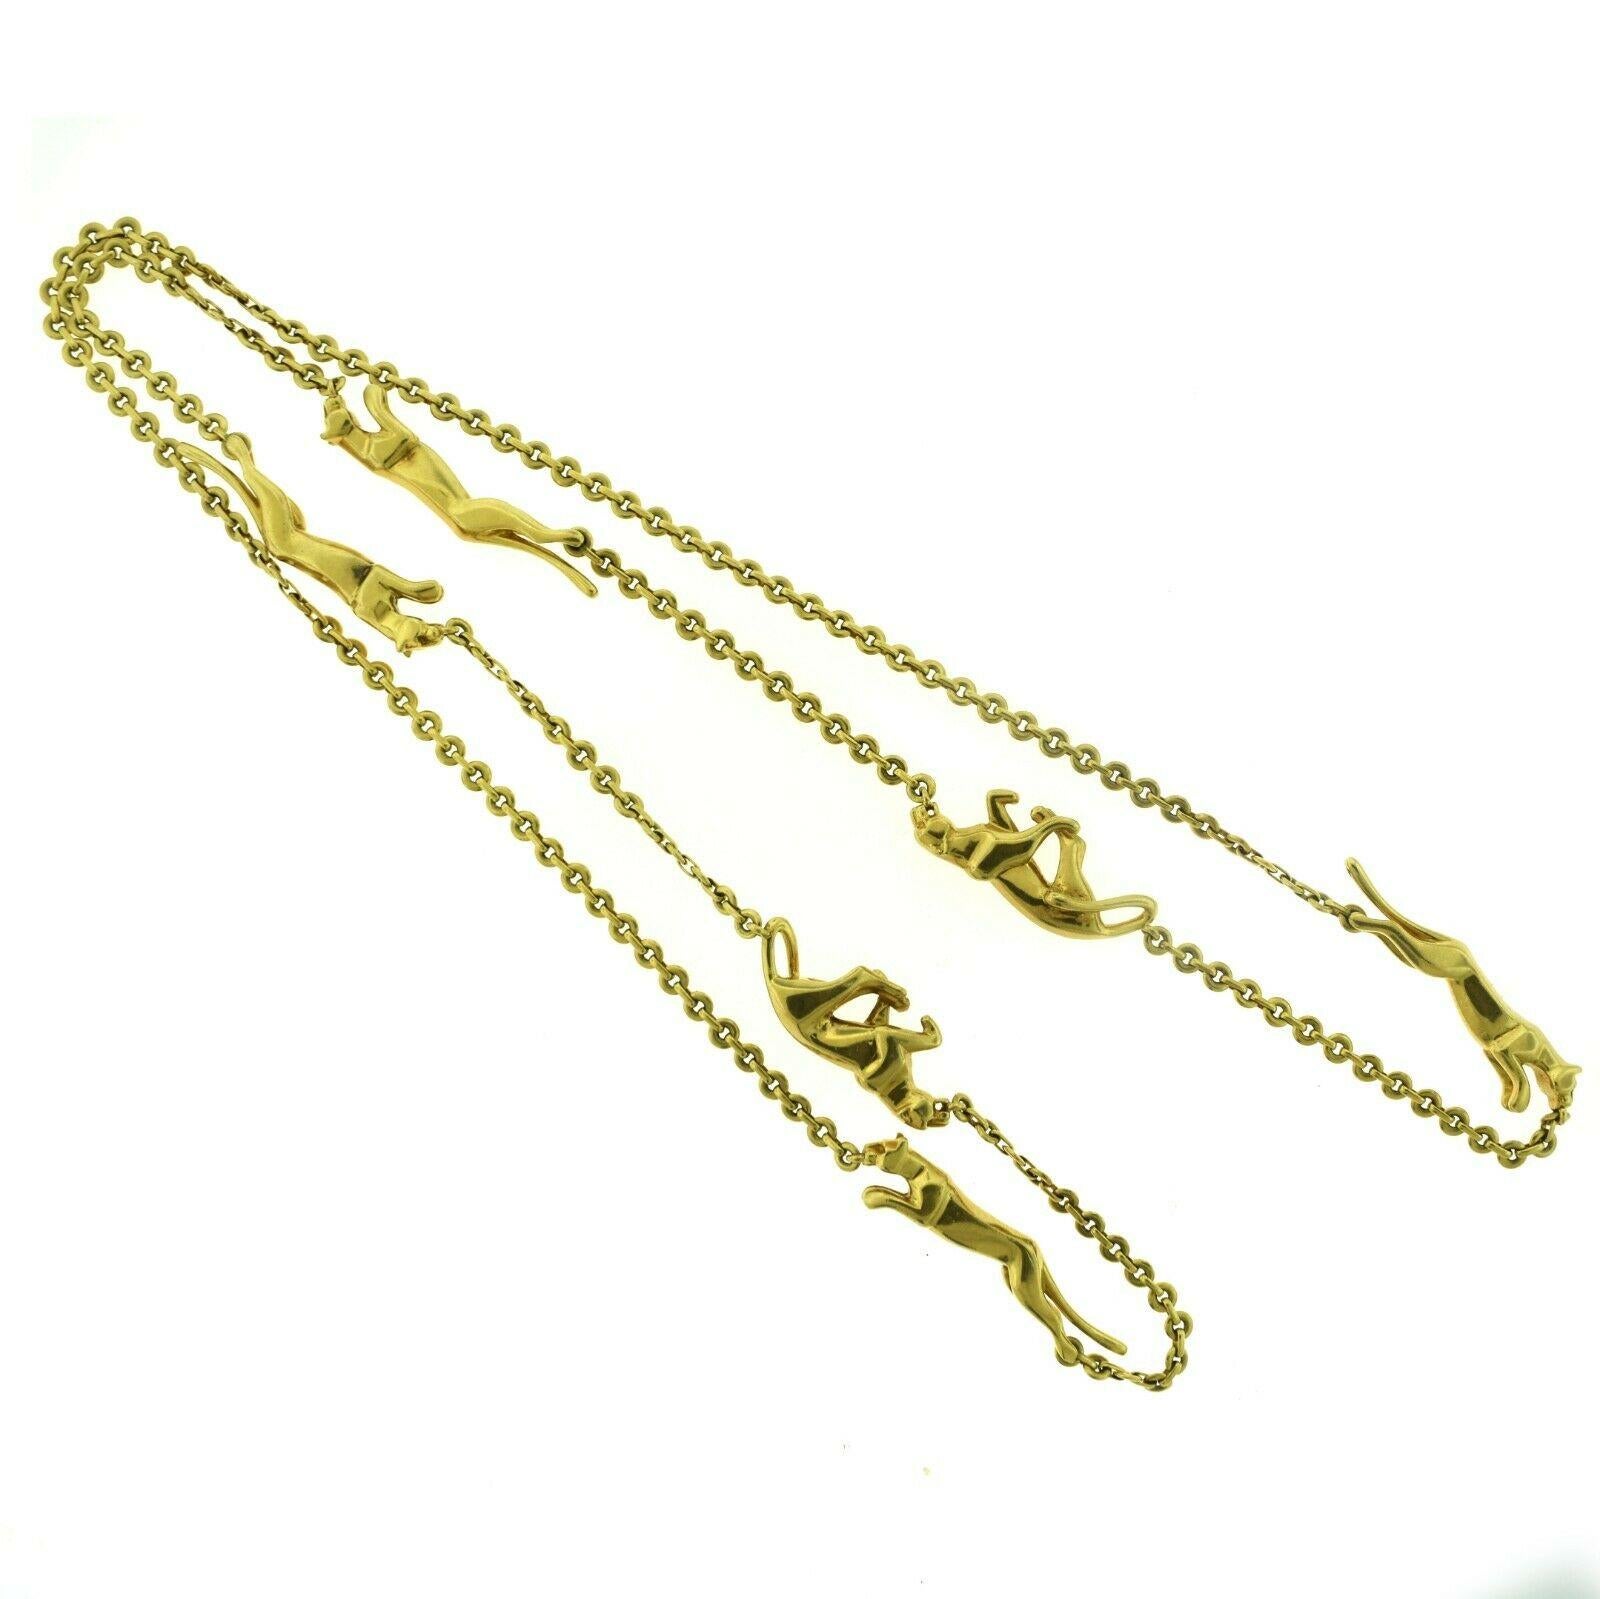 Brilliance Jewels, Miami
Questions? Call Us Anytime!
786,482,8100

Designer: Cartier

Collection: Panthere de Cartier

Style: Long Link 6 Panther Chain Necklace

Metal: Yellow Gold

Metal Purity: 18k

Necklace Length: 36 inches​​​​​​​

Total Item